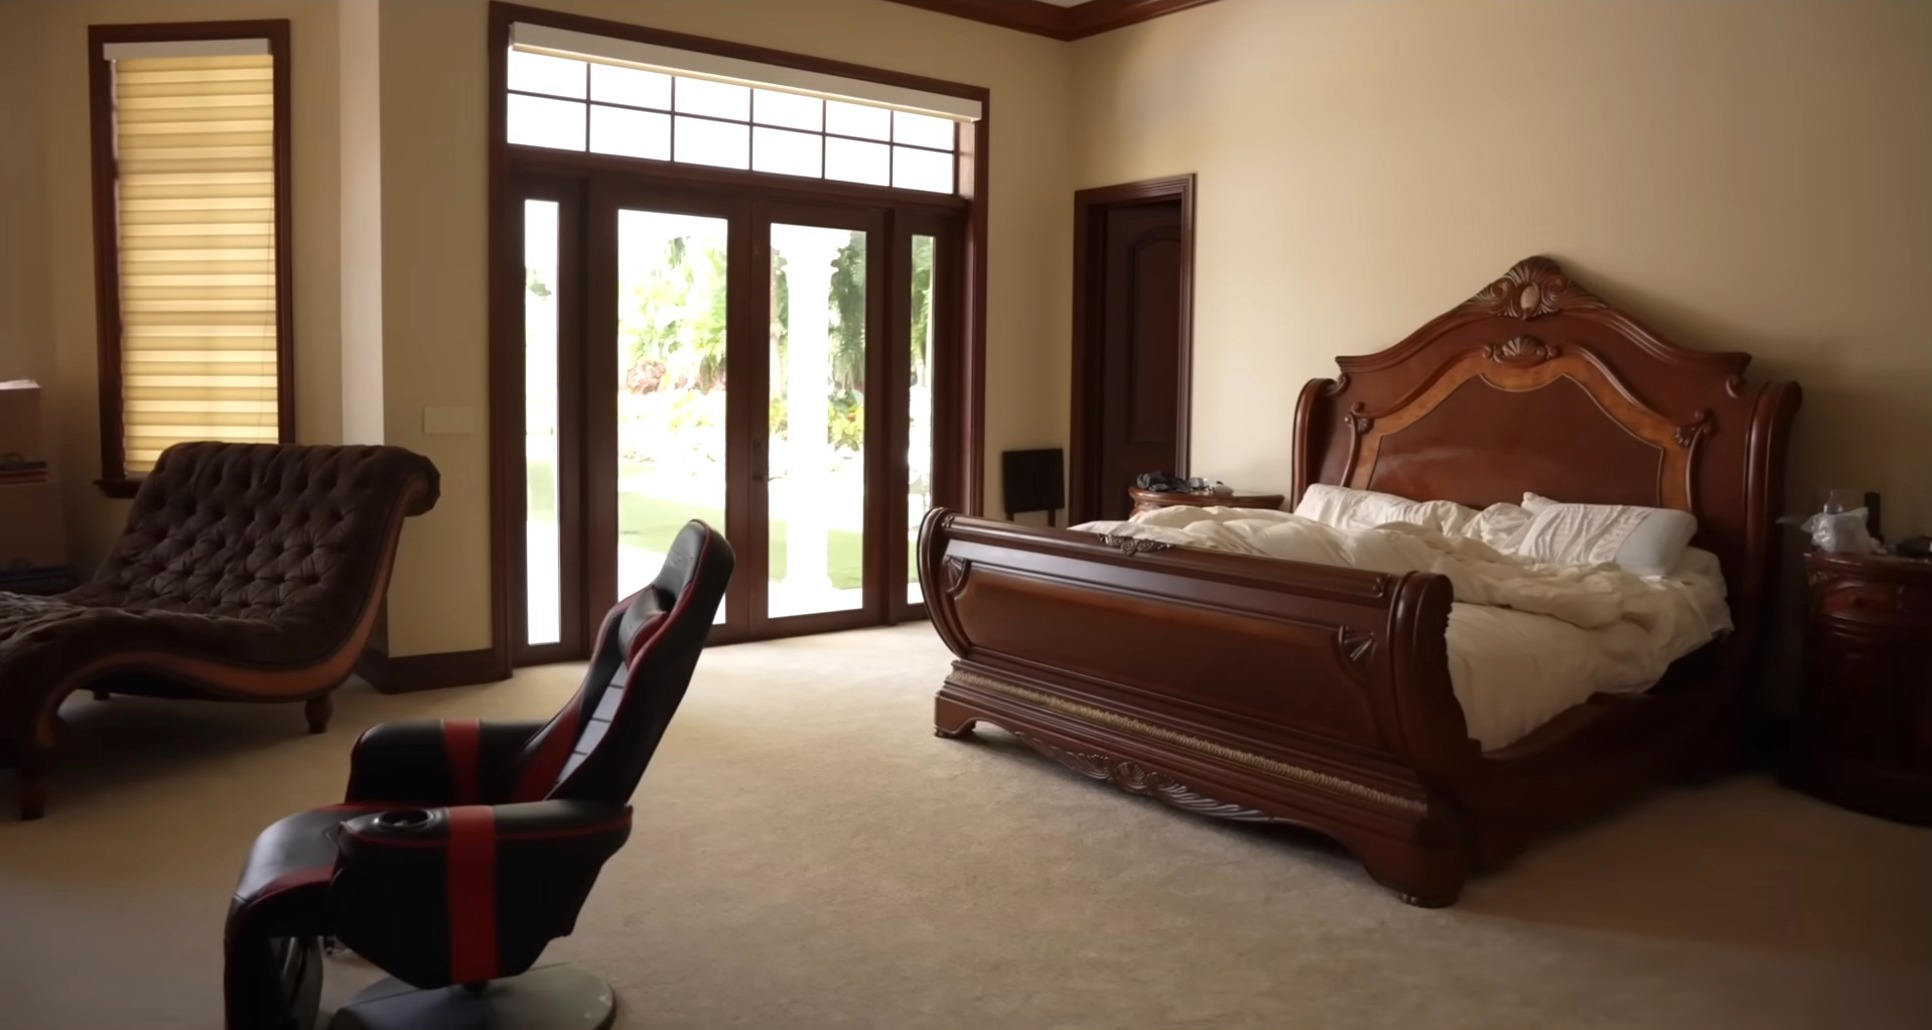 His master bedroom overlooks the swimming pool and basketball court